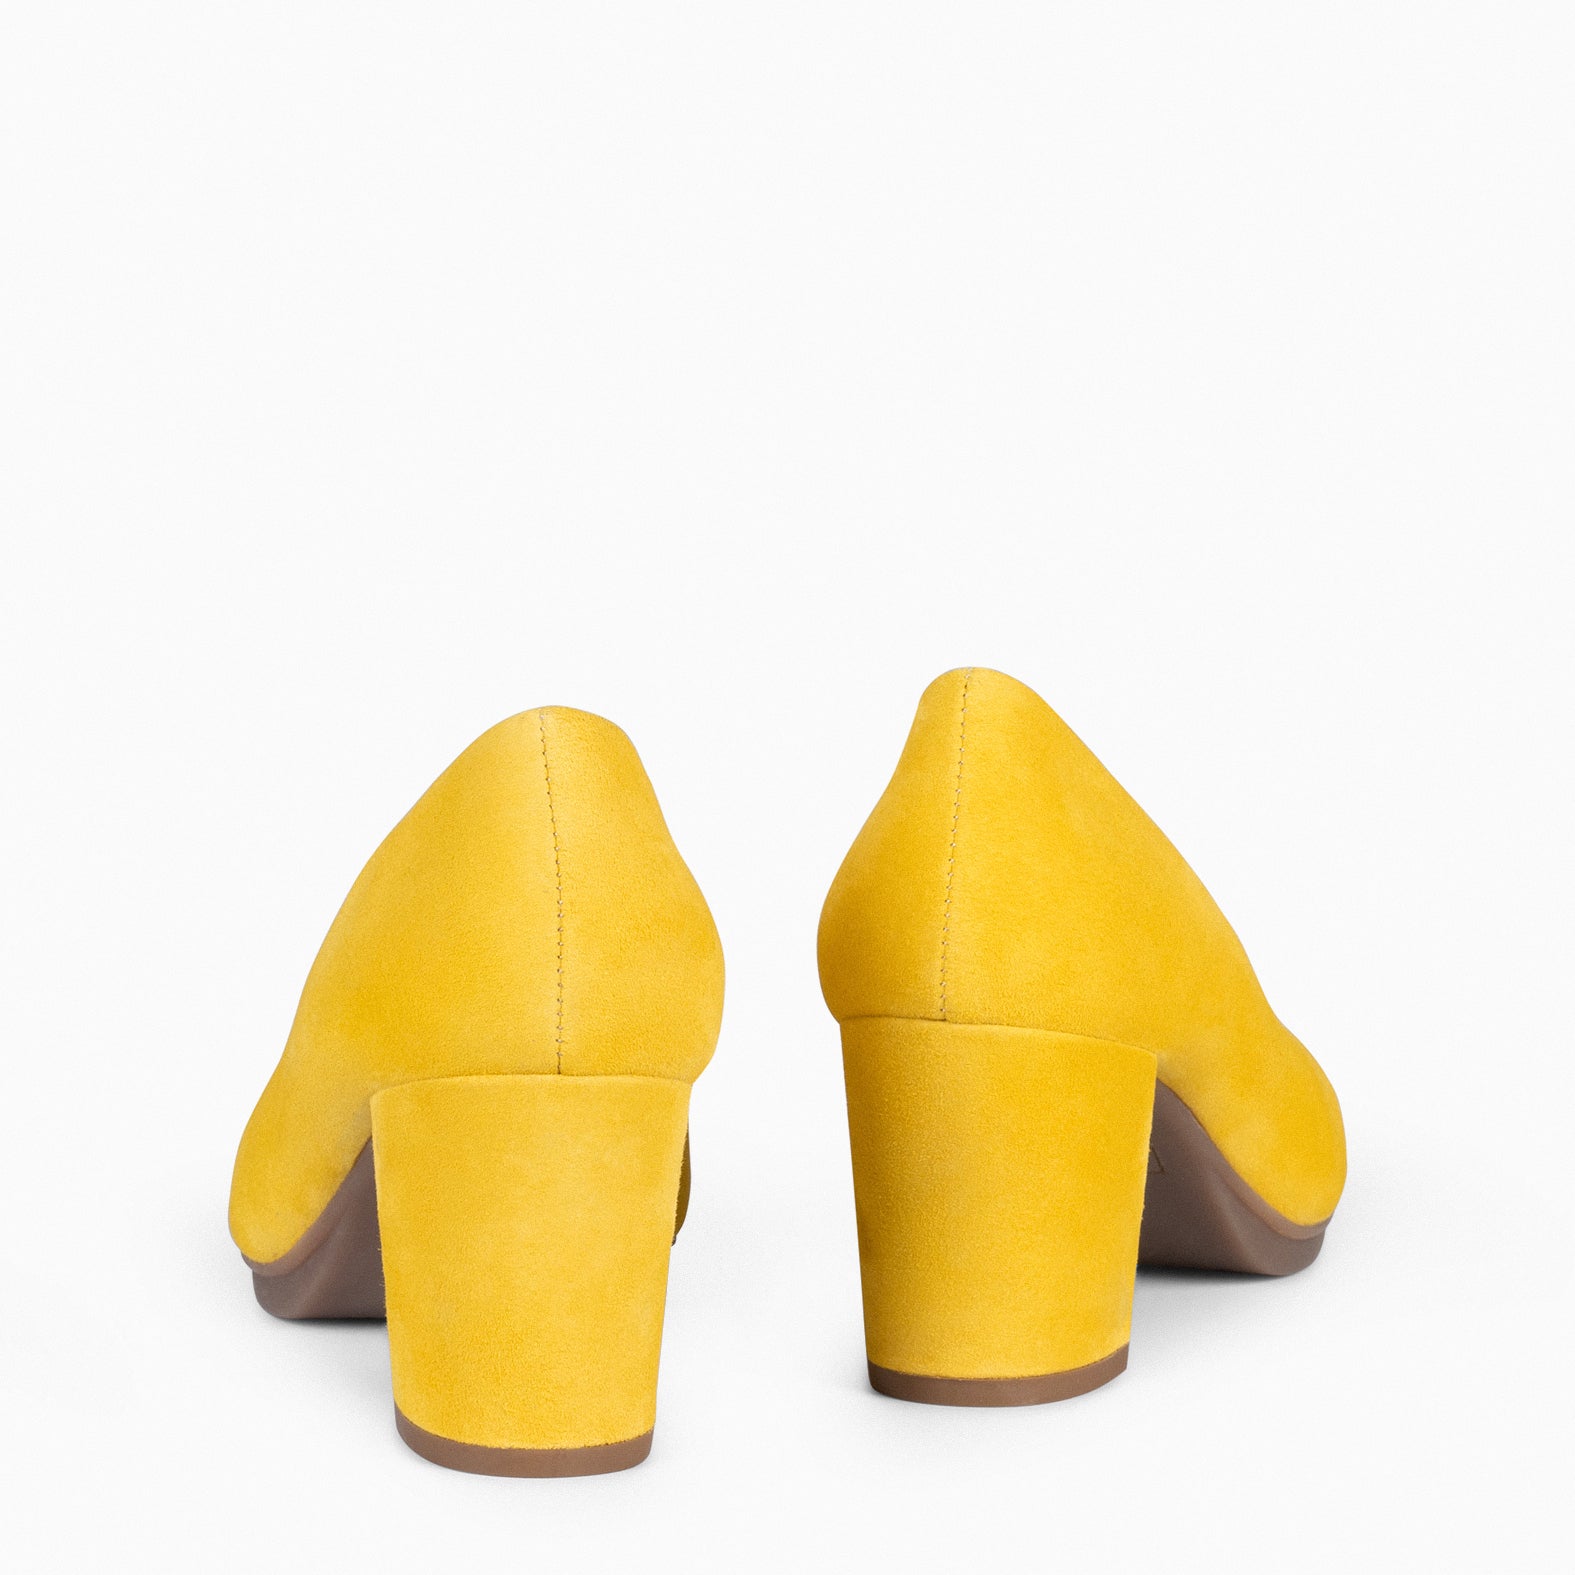 URBAN S – YELLOW Suede Mid-Heeled Shoes 